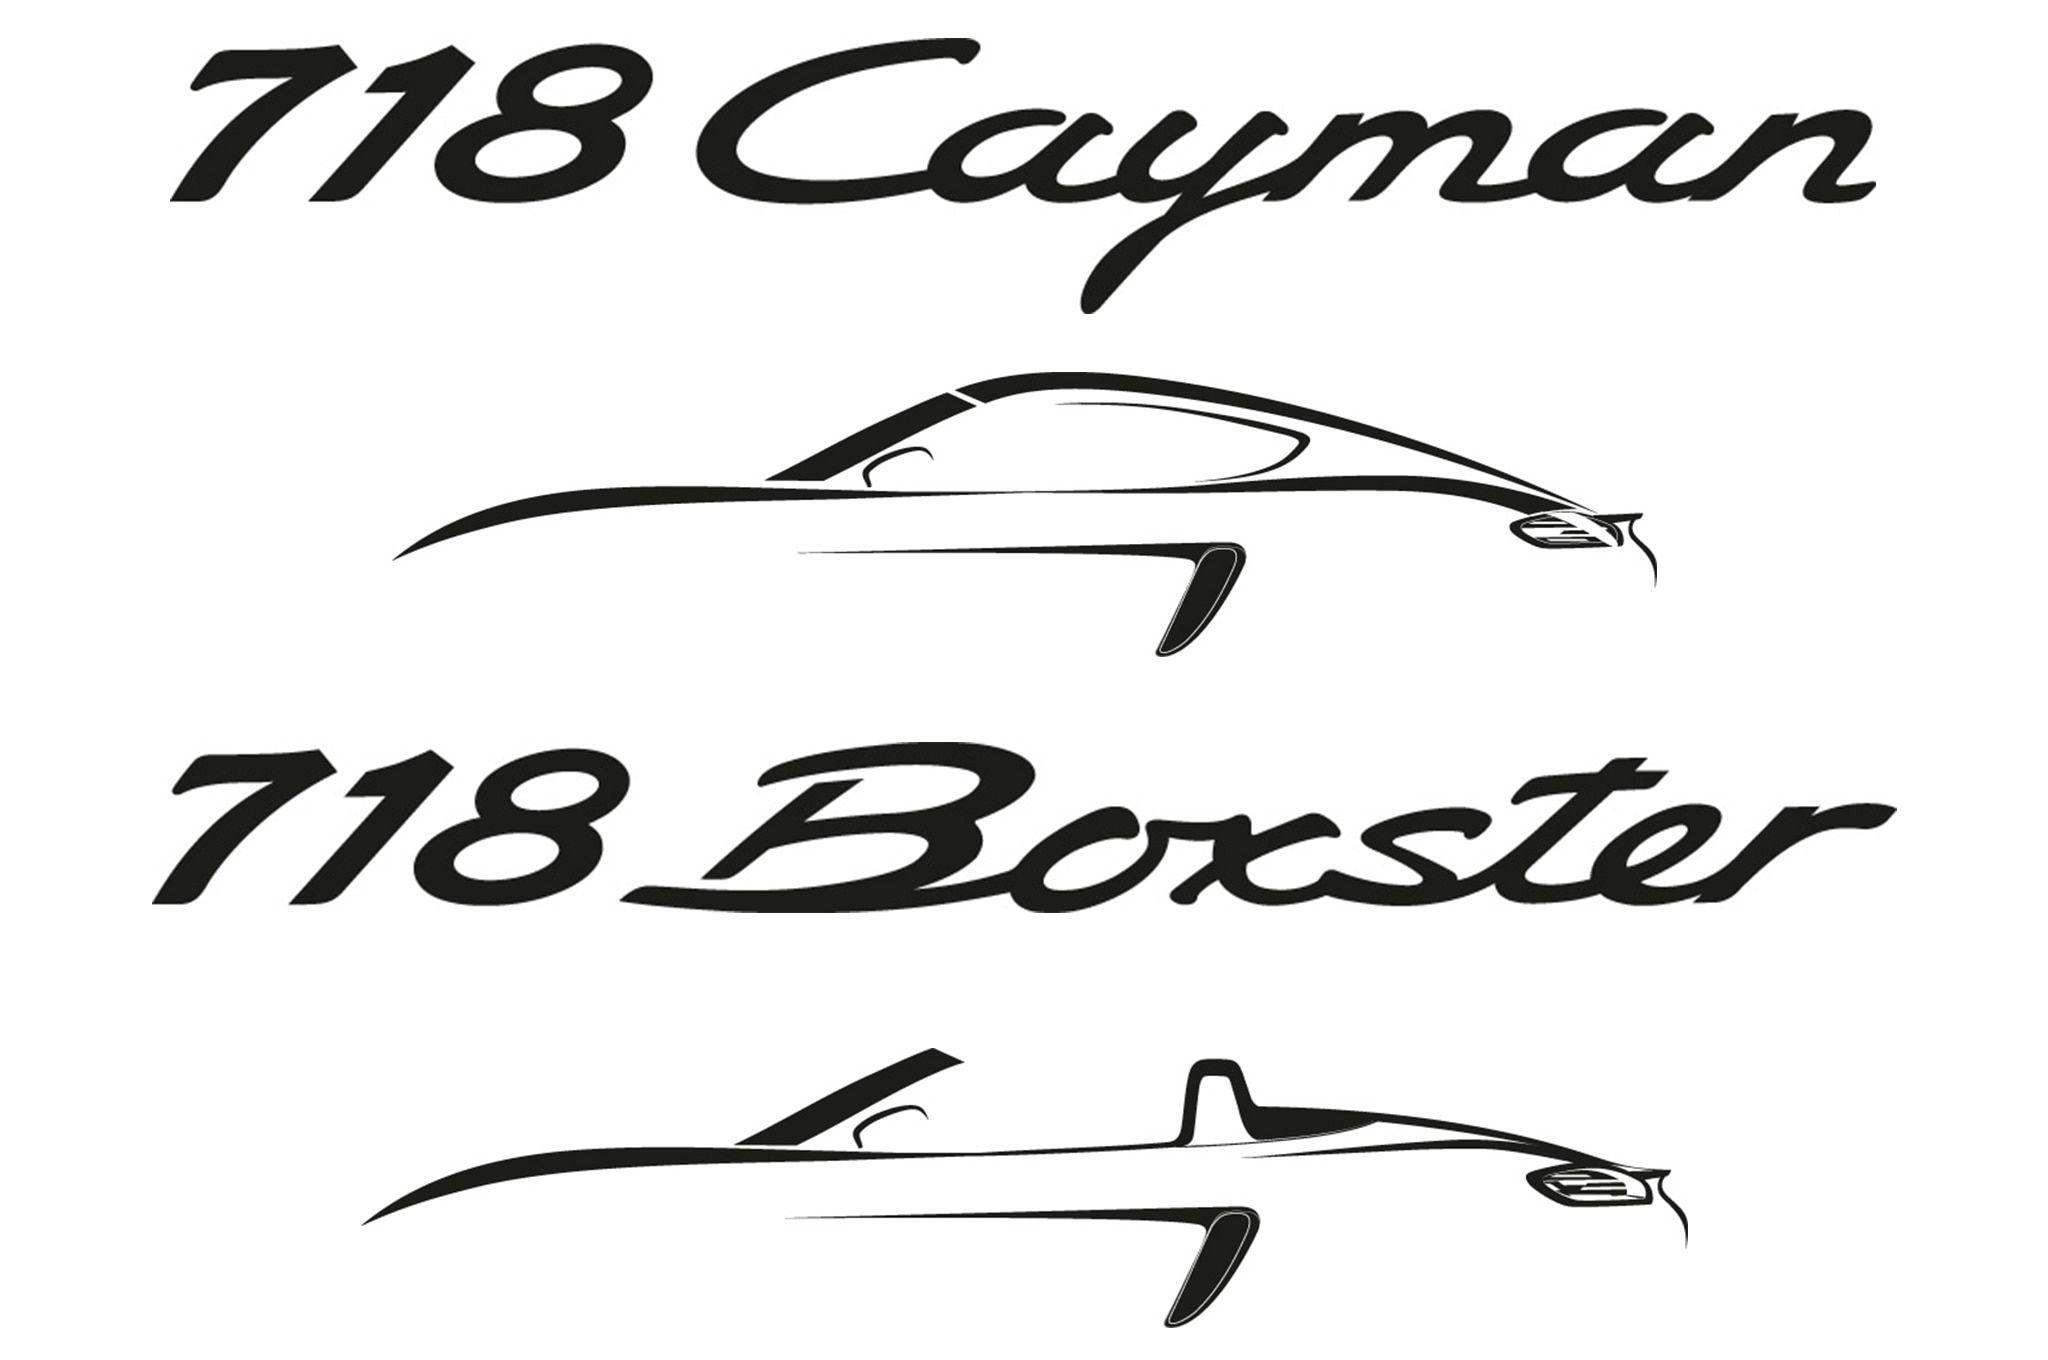 Porsche Boxster Logo - Porsche Boxster, Cayman To Be Renamed Go Four Cylinder In 2016